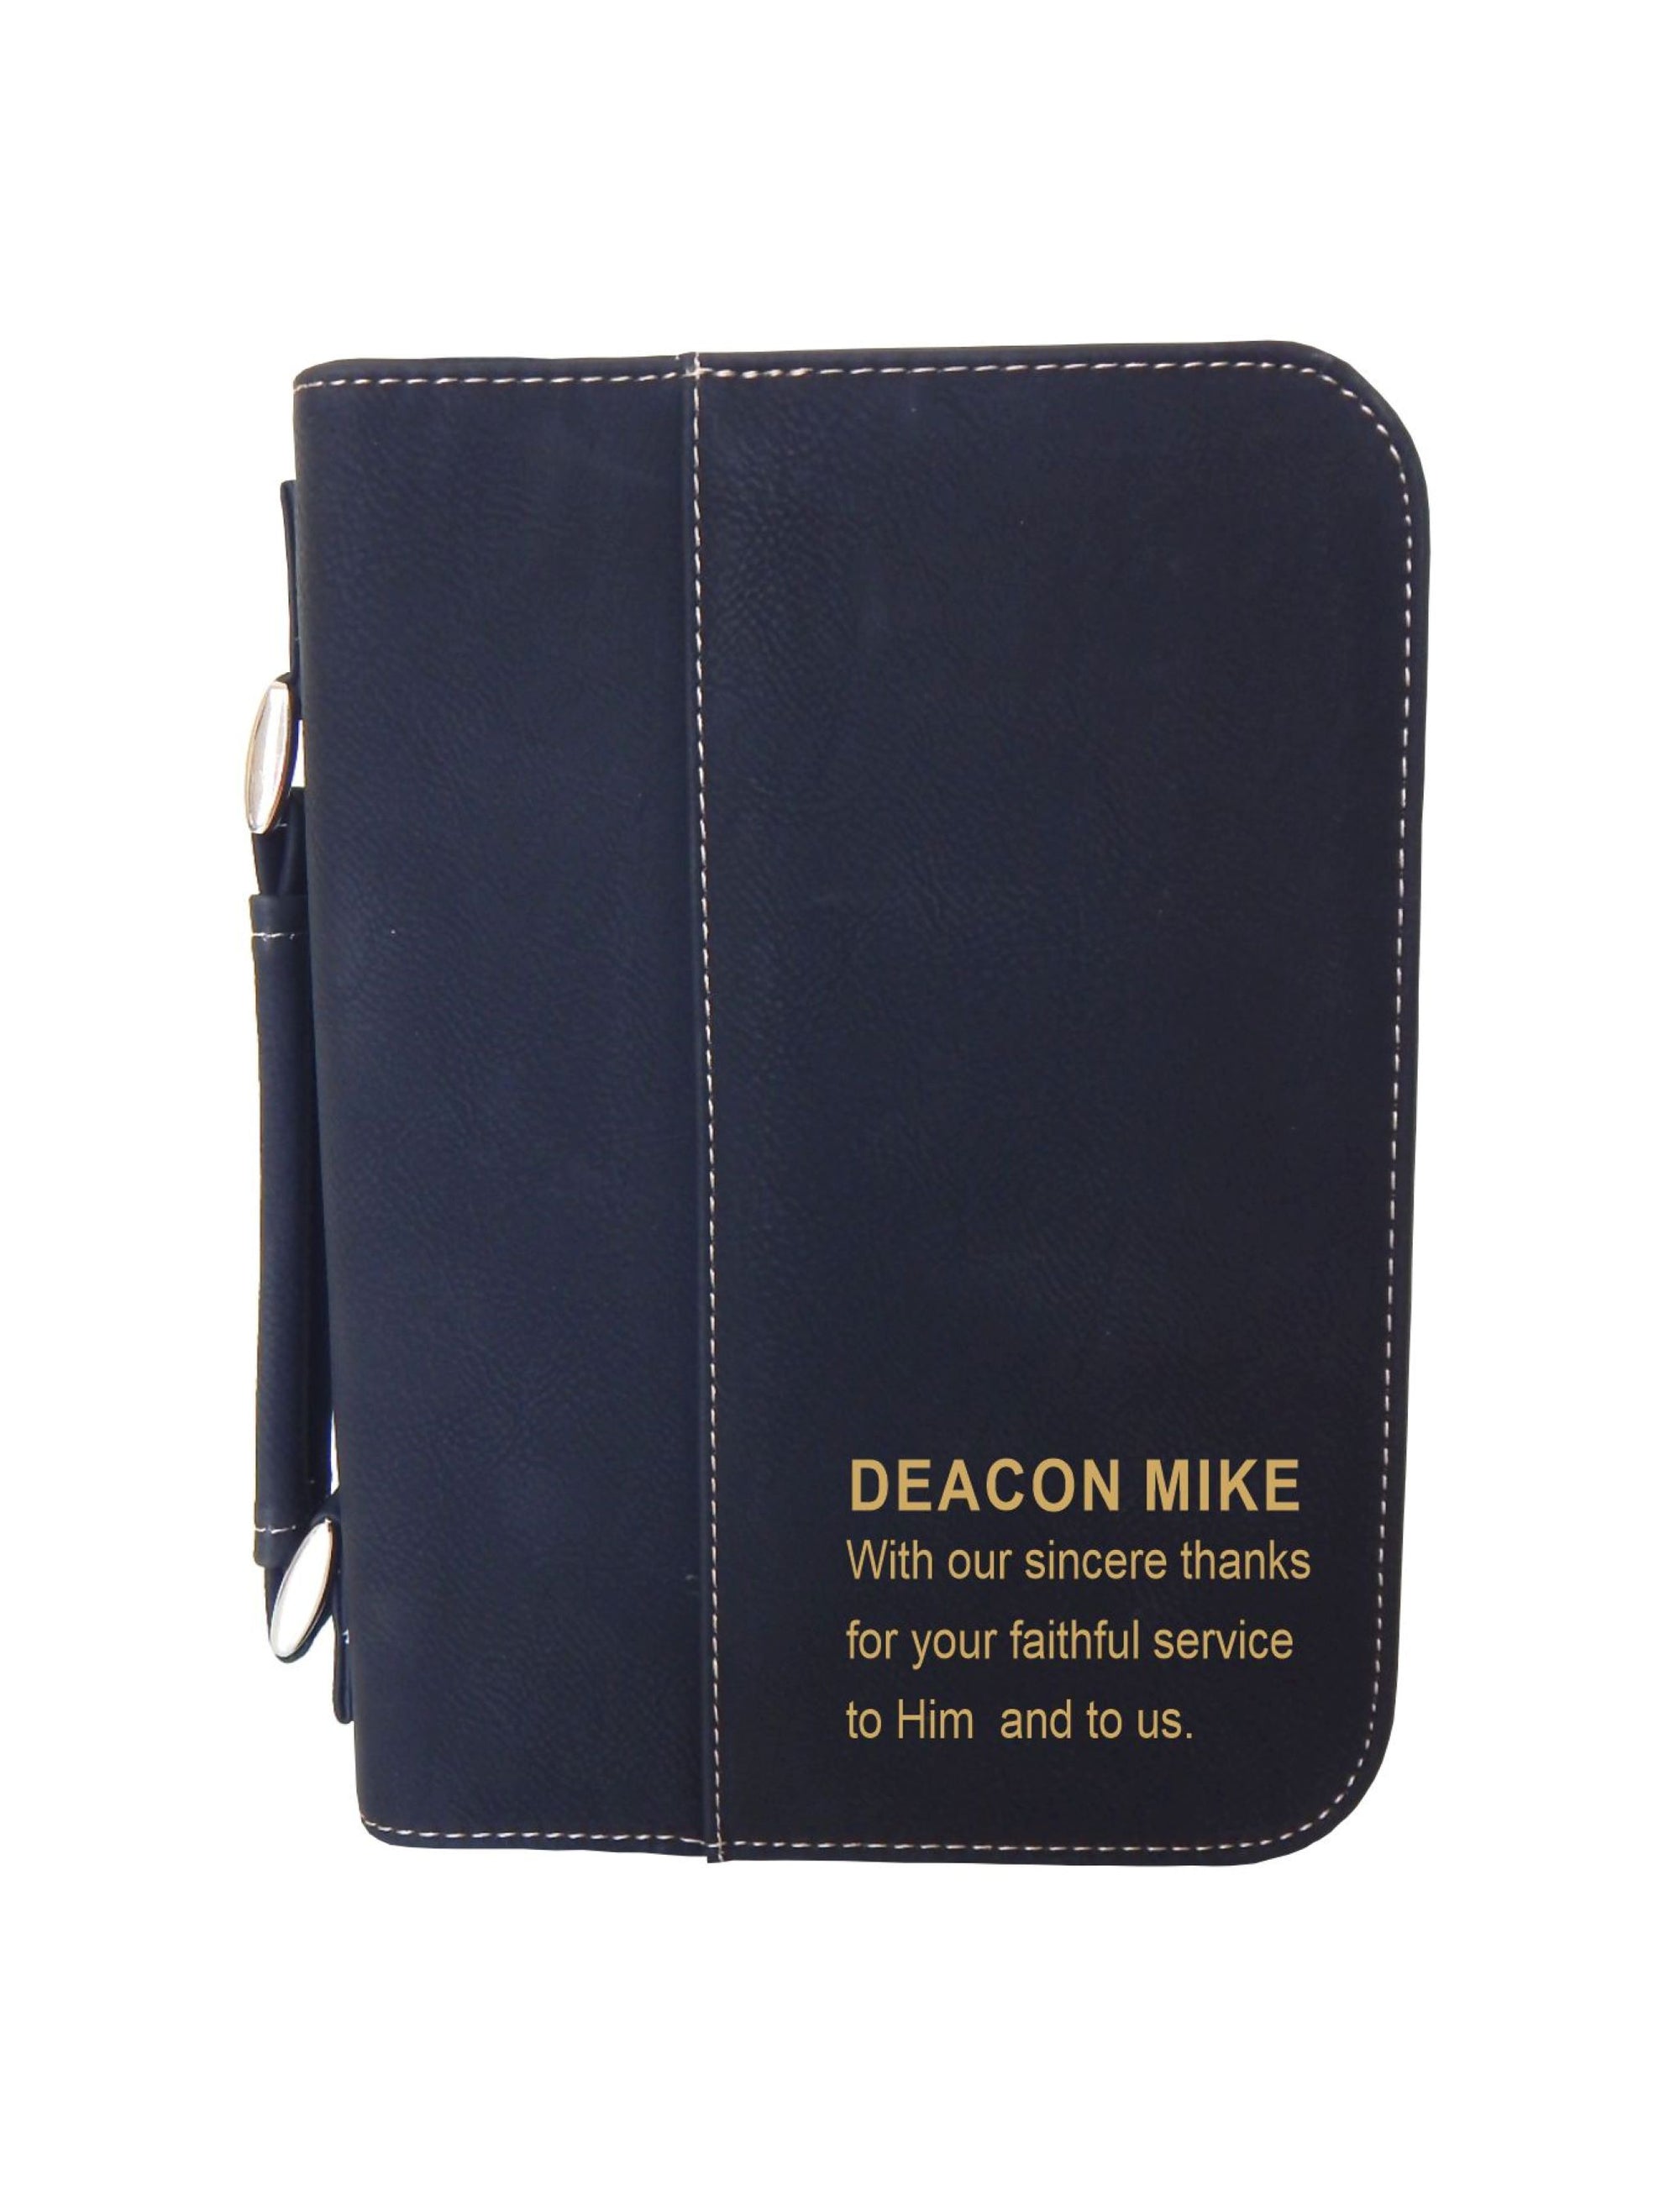 Deacon Ordination Gift | Priest Gift | Personalized Engraved Leather Bible Cover BCL006